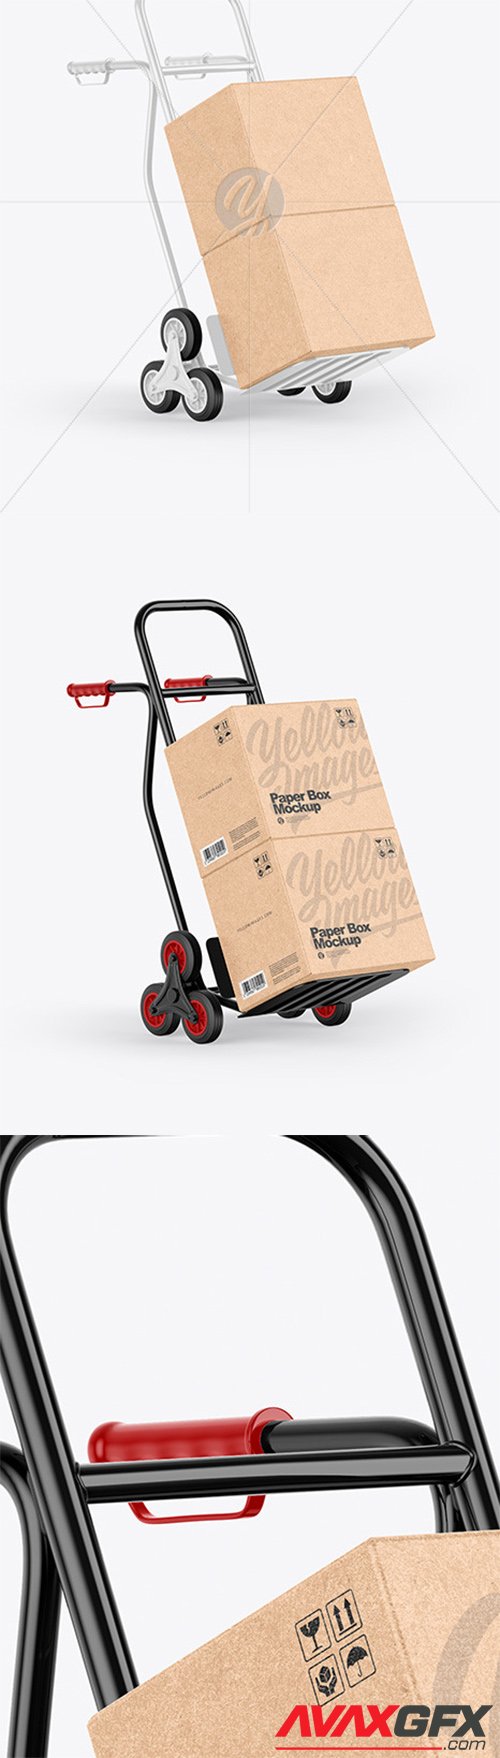 Download Hand Pallet Truck Kraft Box Mockup 60618 Avaxgfx All Downloads That You Need In One Place Graphic From Nitroflare Rapidgator